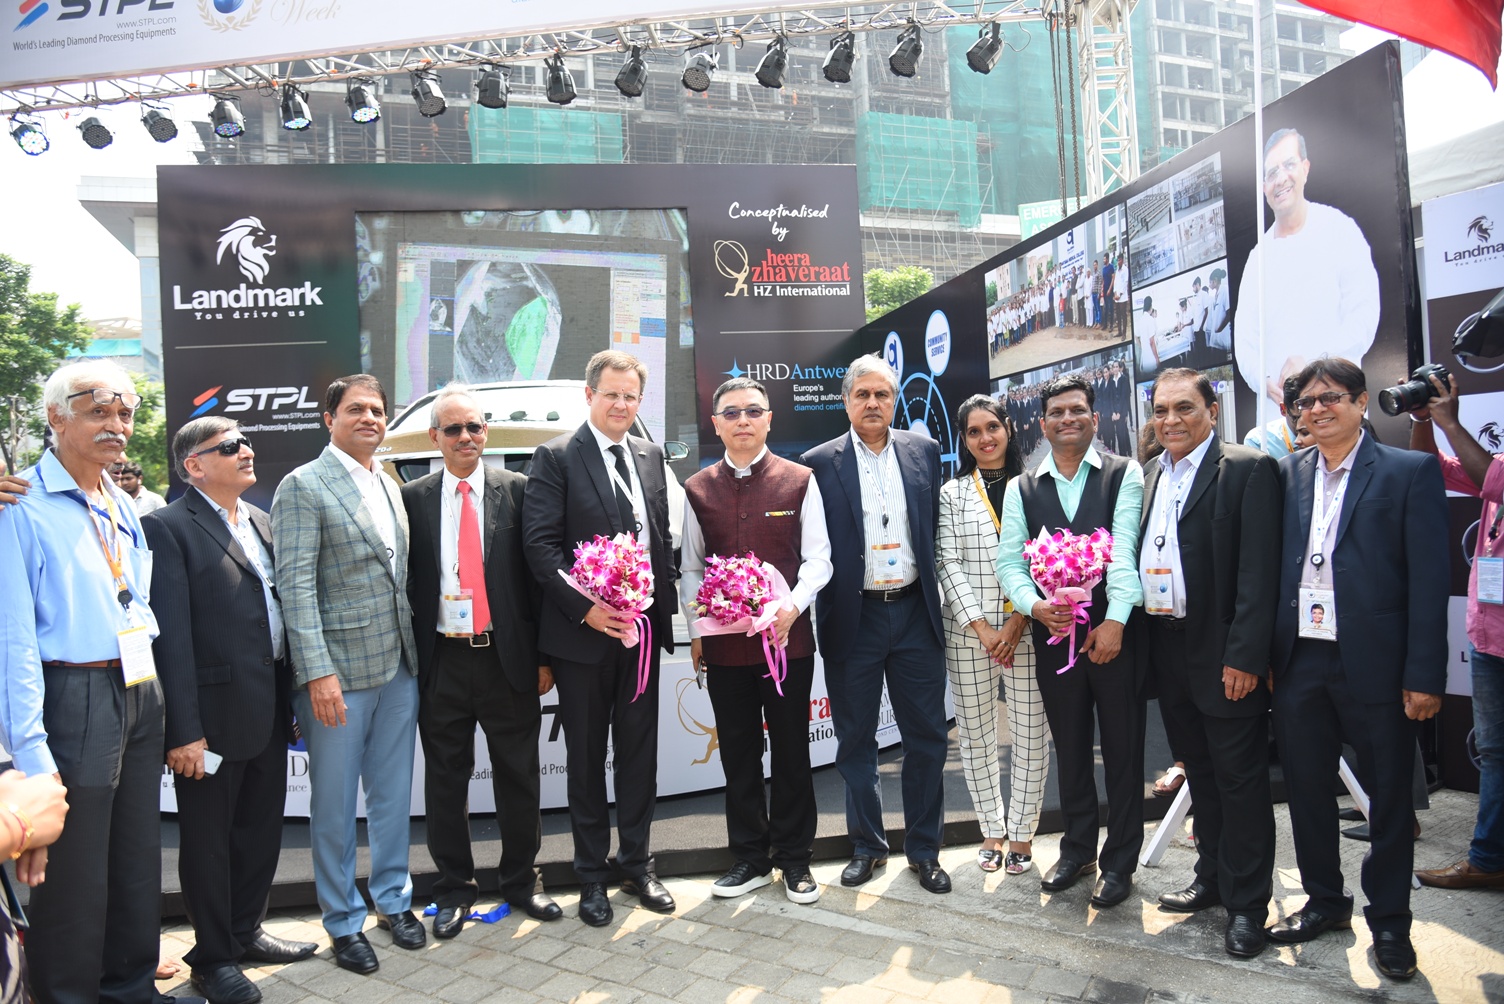 The third edition of Bharat Diamond Week (BDW) saw a flying start with an august inauguration at Bharat Diamond Bourse (BDB), in the august presence of Mr. Evgeny Agureev (Deputy CEO, Alrosa) and Mr. Nanhai Yan (Vice President, Shanghai Diamond Exchange) in Centre flanked by (on the left of Mr. Agureev) Mr. Mehul Shah (VP, BDB) and Mr. Ashok Gajera (MD, Laxmi Diamond); on the right of Mr. Yan - Mr. Anoop Mehta (President-BDB), Ms. Reena Shukla (director HZ International trade Journal.) and Mr. Rajesh Bajaj (MD, Bajaj Overseas Ltd.) and others. BDW opened in Bharat Diamond Bourse and will close on 16th October 2019.-Photo By Sachin Murdeshwar GPN 